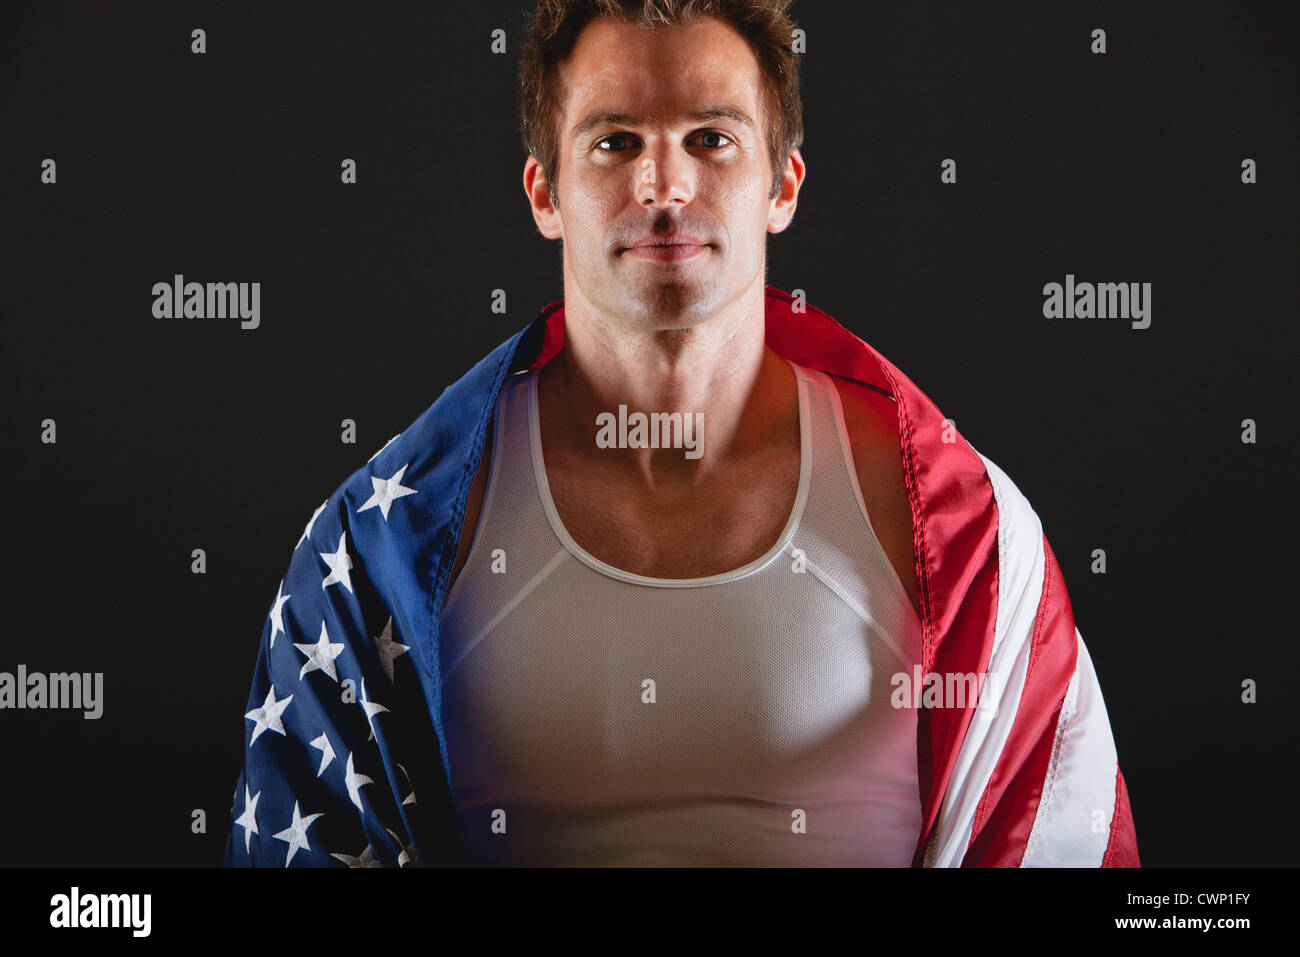 Athlete covered with American flag, portrait Stock Photo